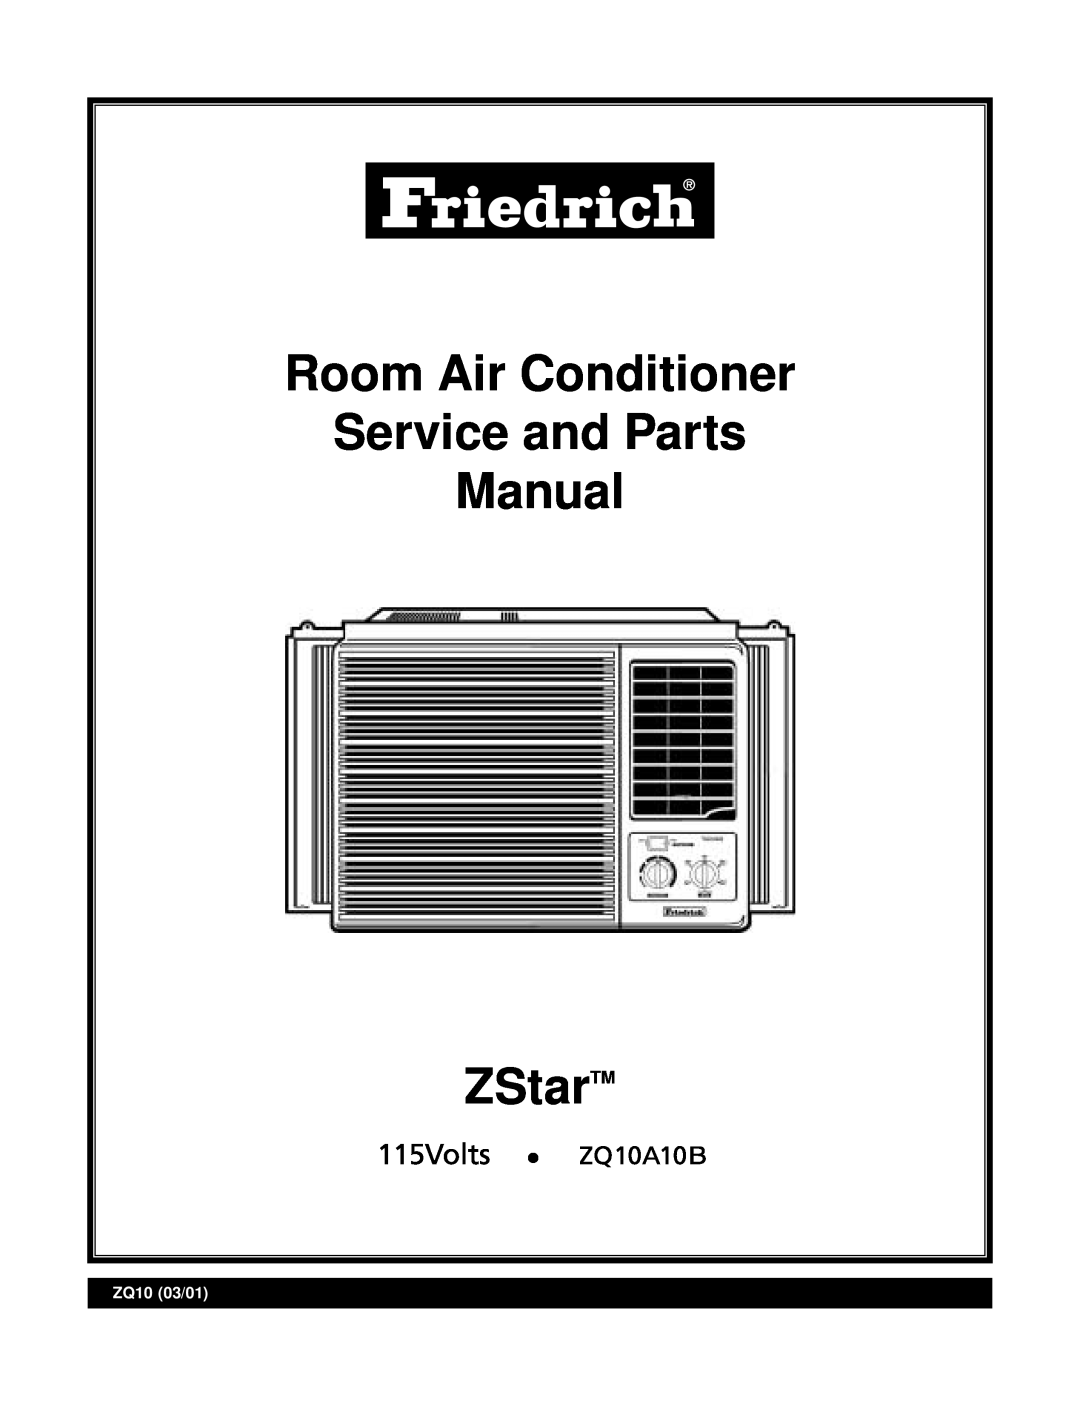 Friedrich ZQ10 A10B manual Room Air Conditioner Service and Parts Manual, ZStarTM, ZQ10 03/01 